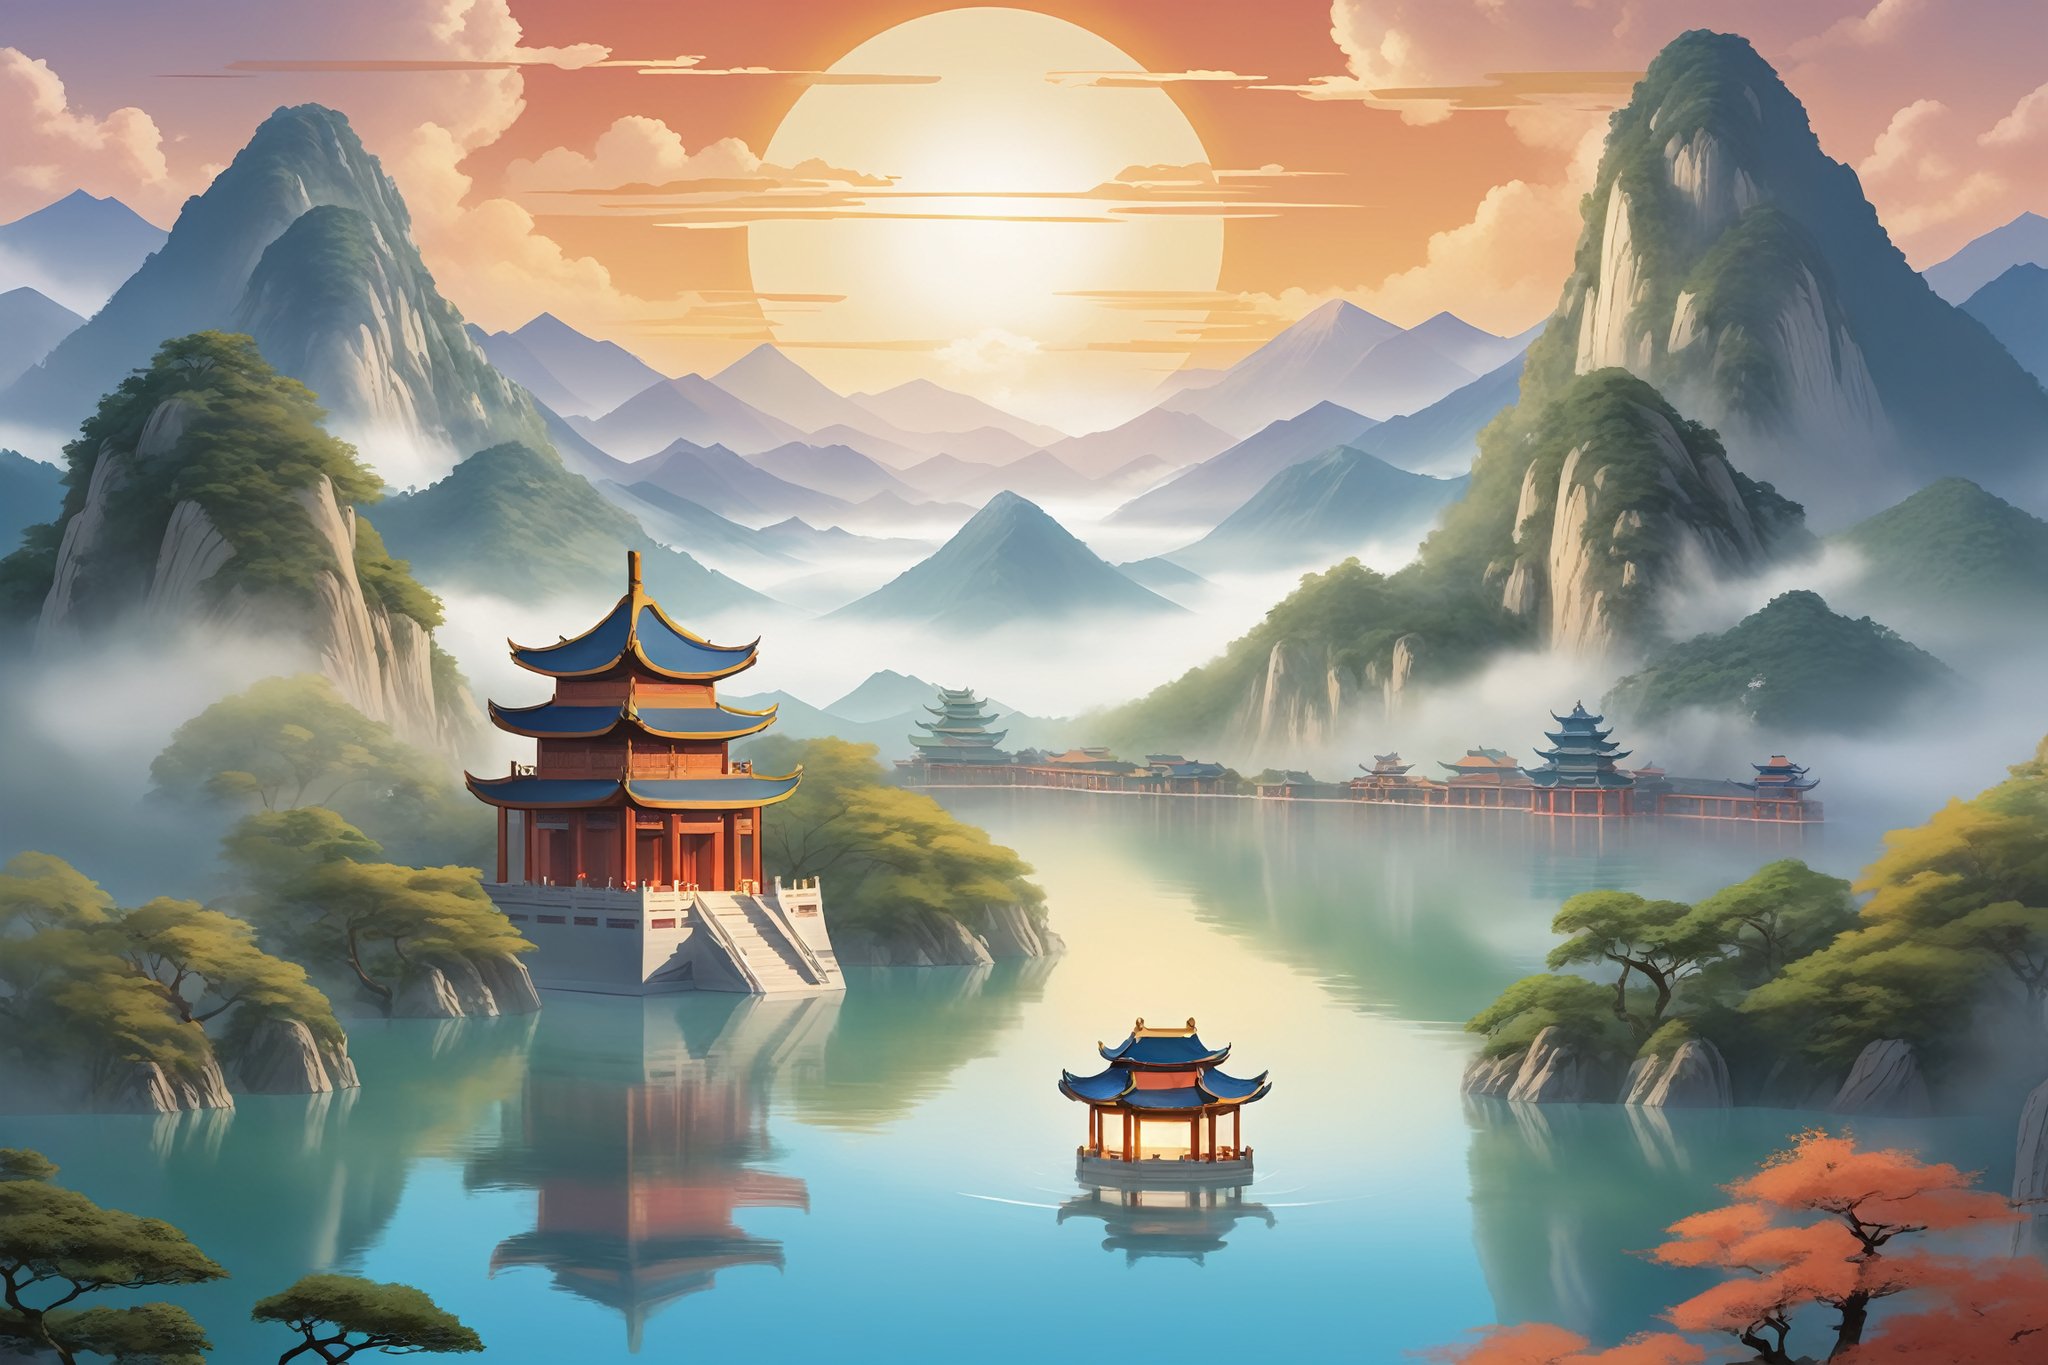 A majestic scene unfolds: a serene landscape with misty mountains and a tranquil lake in the distance. In the center, the revered god of Chinese mythology stands majestically, bestowing the four-color treasure box upon the ten guardian elders. Each elder, robed in regal attire, holds a matching treasure box adorned with intricate carvings. Soft sunlight casts a warm glow on the figures, as if the very essence of harmony and balance is being imparted.